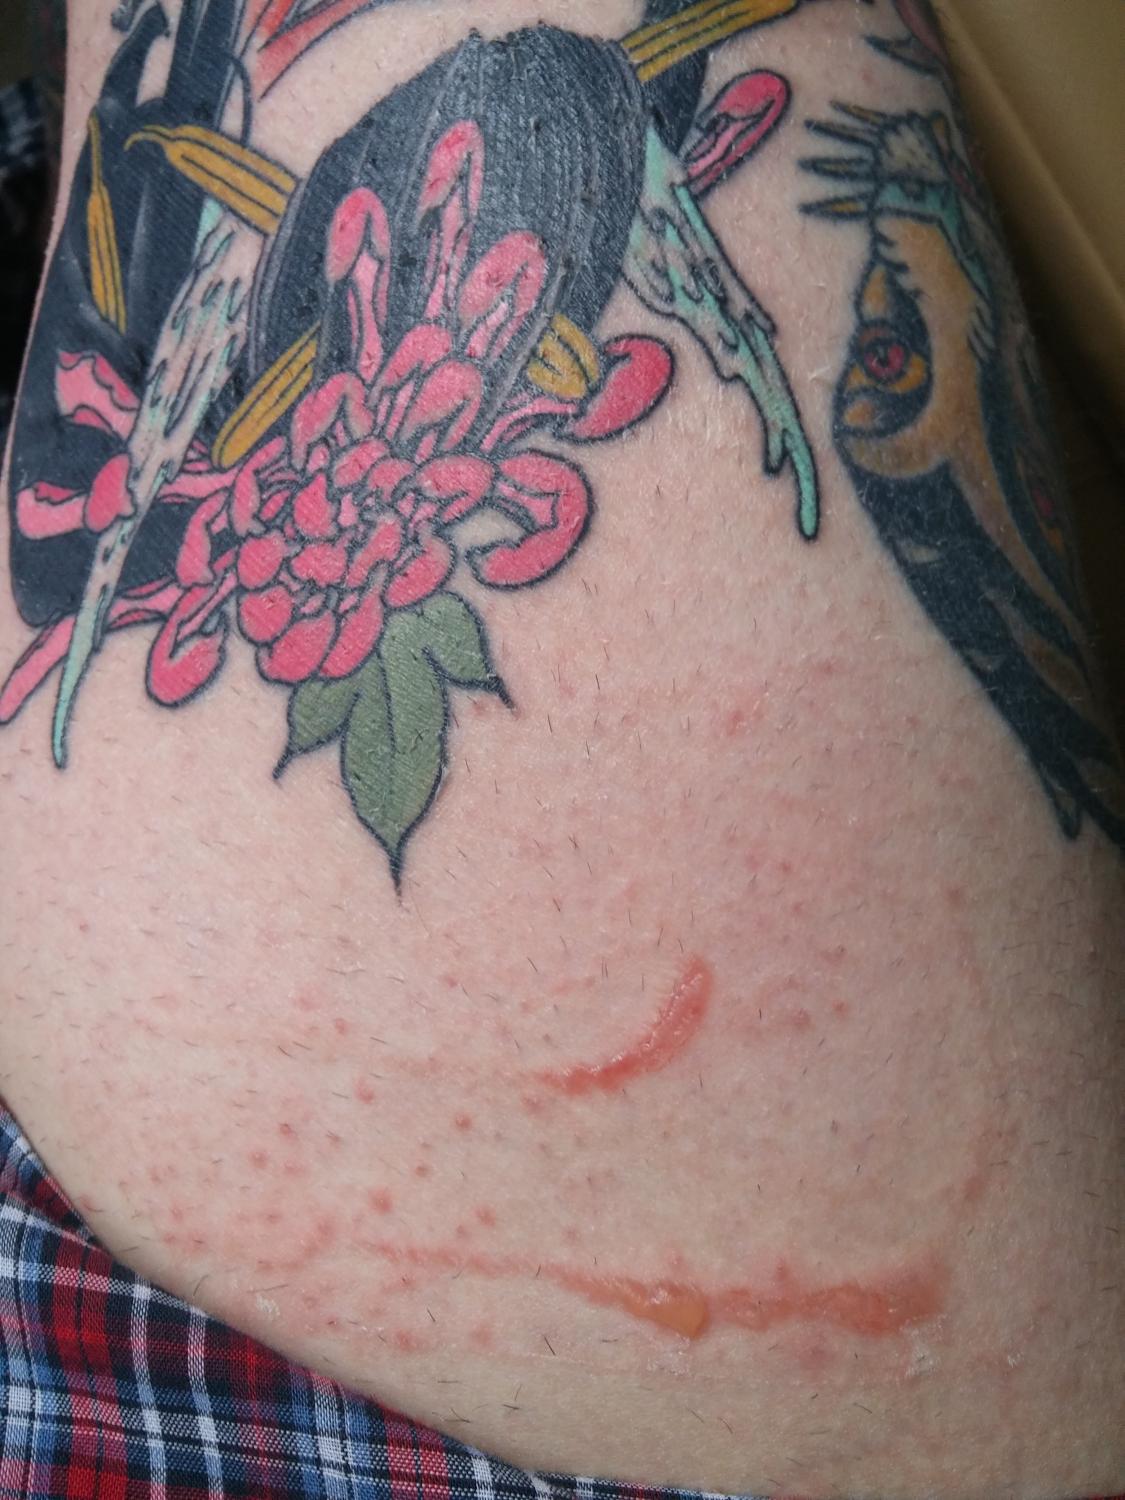 Tattoos and Eczema Can Coexist Tattooing Tips If You Have Eczema